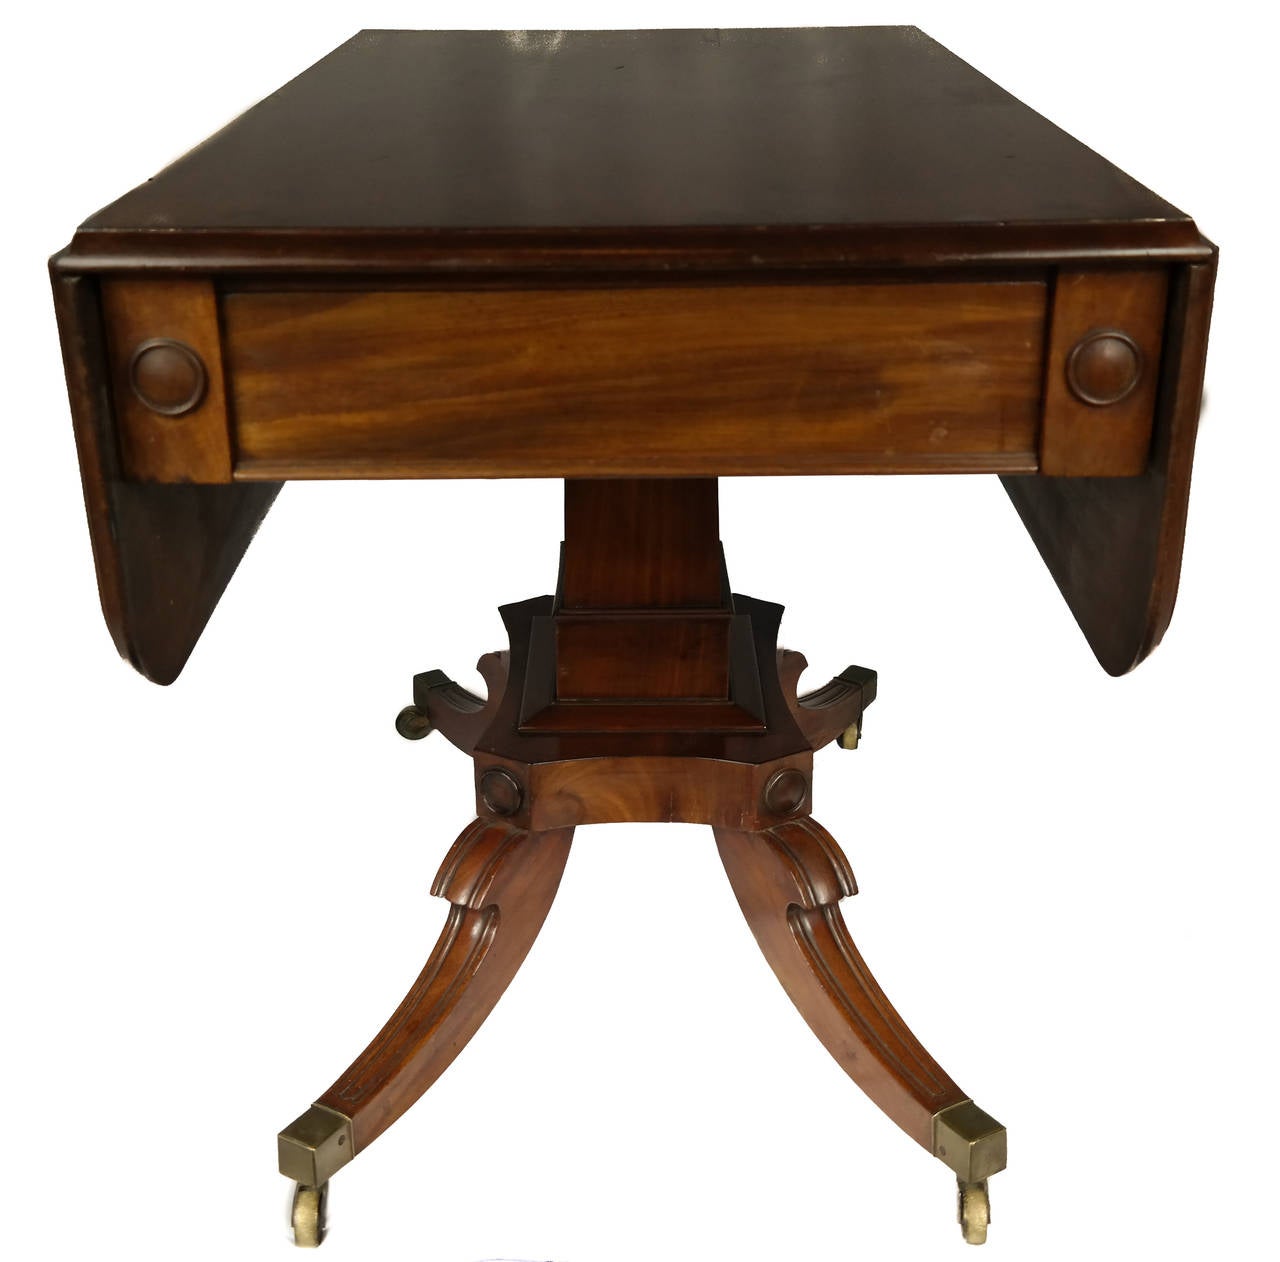 Pembroke table with brass casters, American, late 19th century.